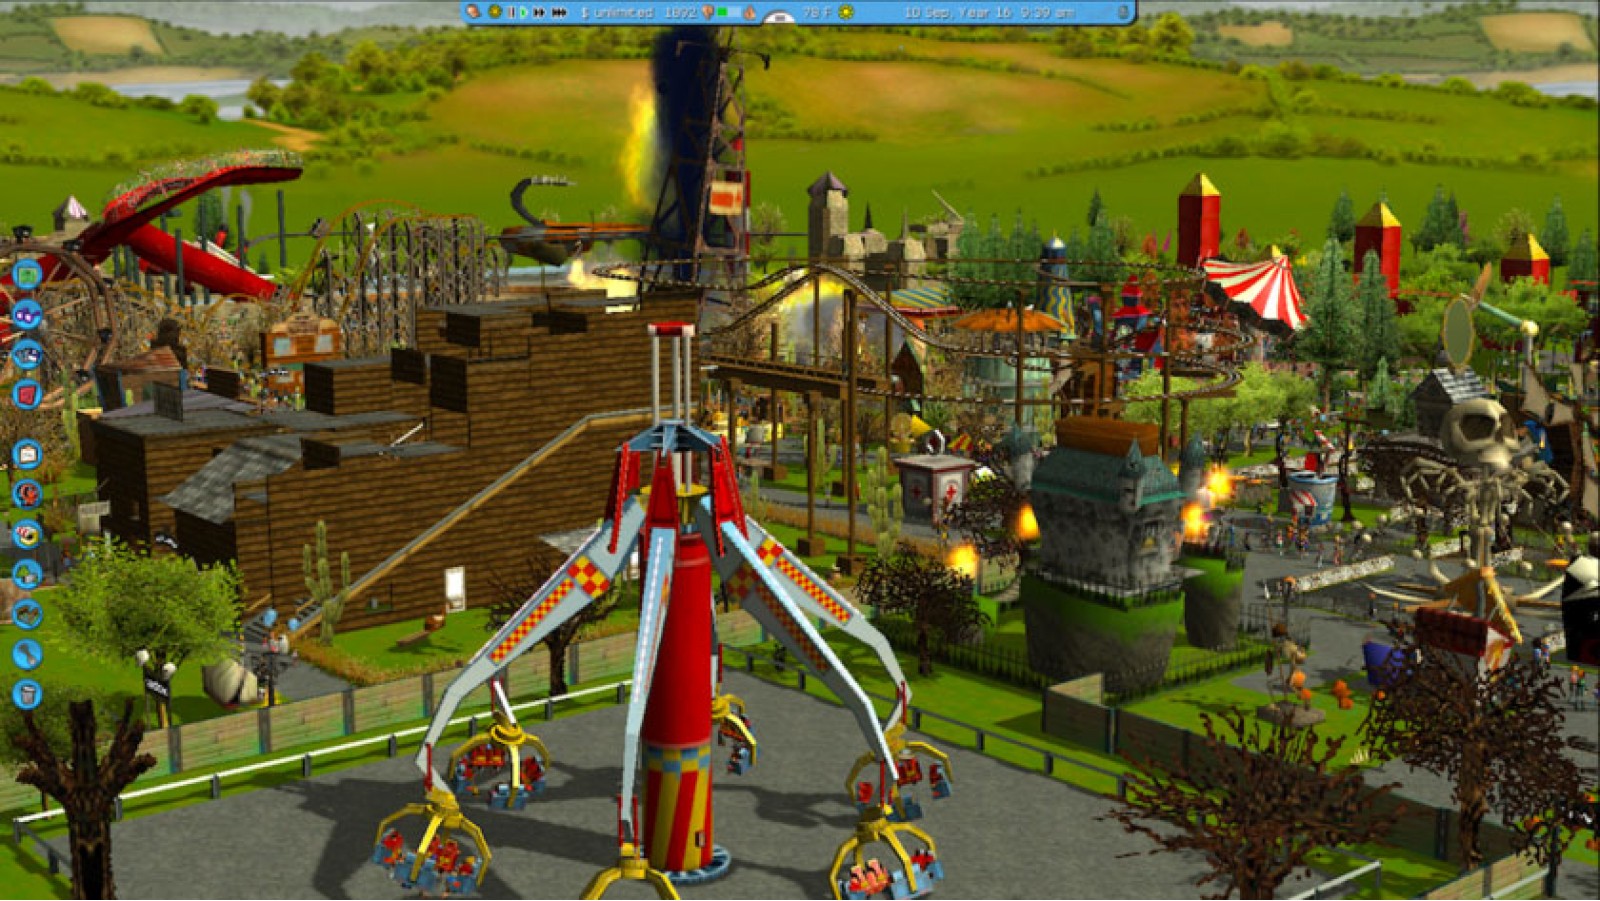 Rollercoaster Building Game Online Free,Make Your Own